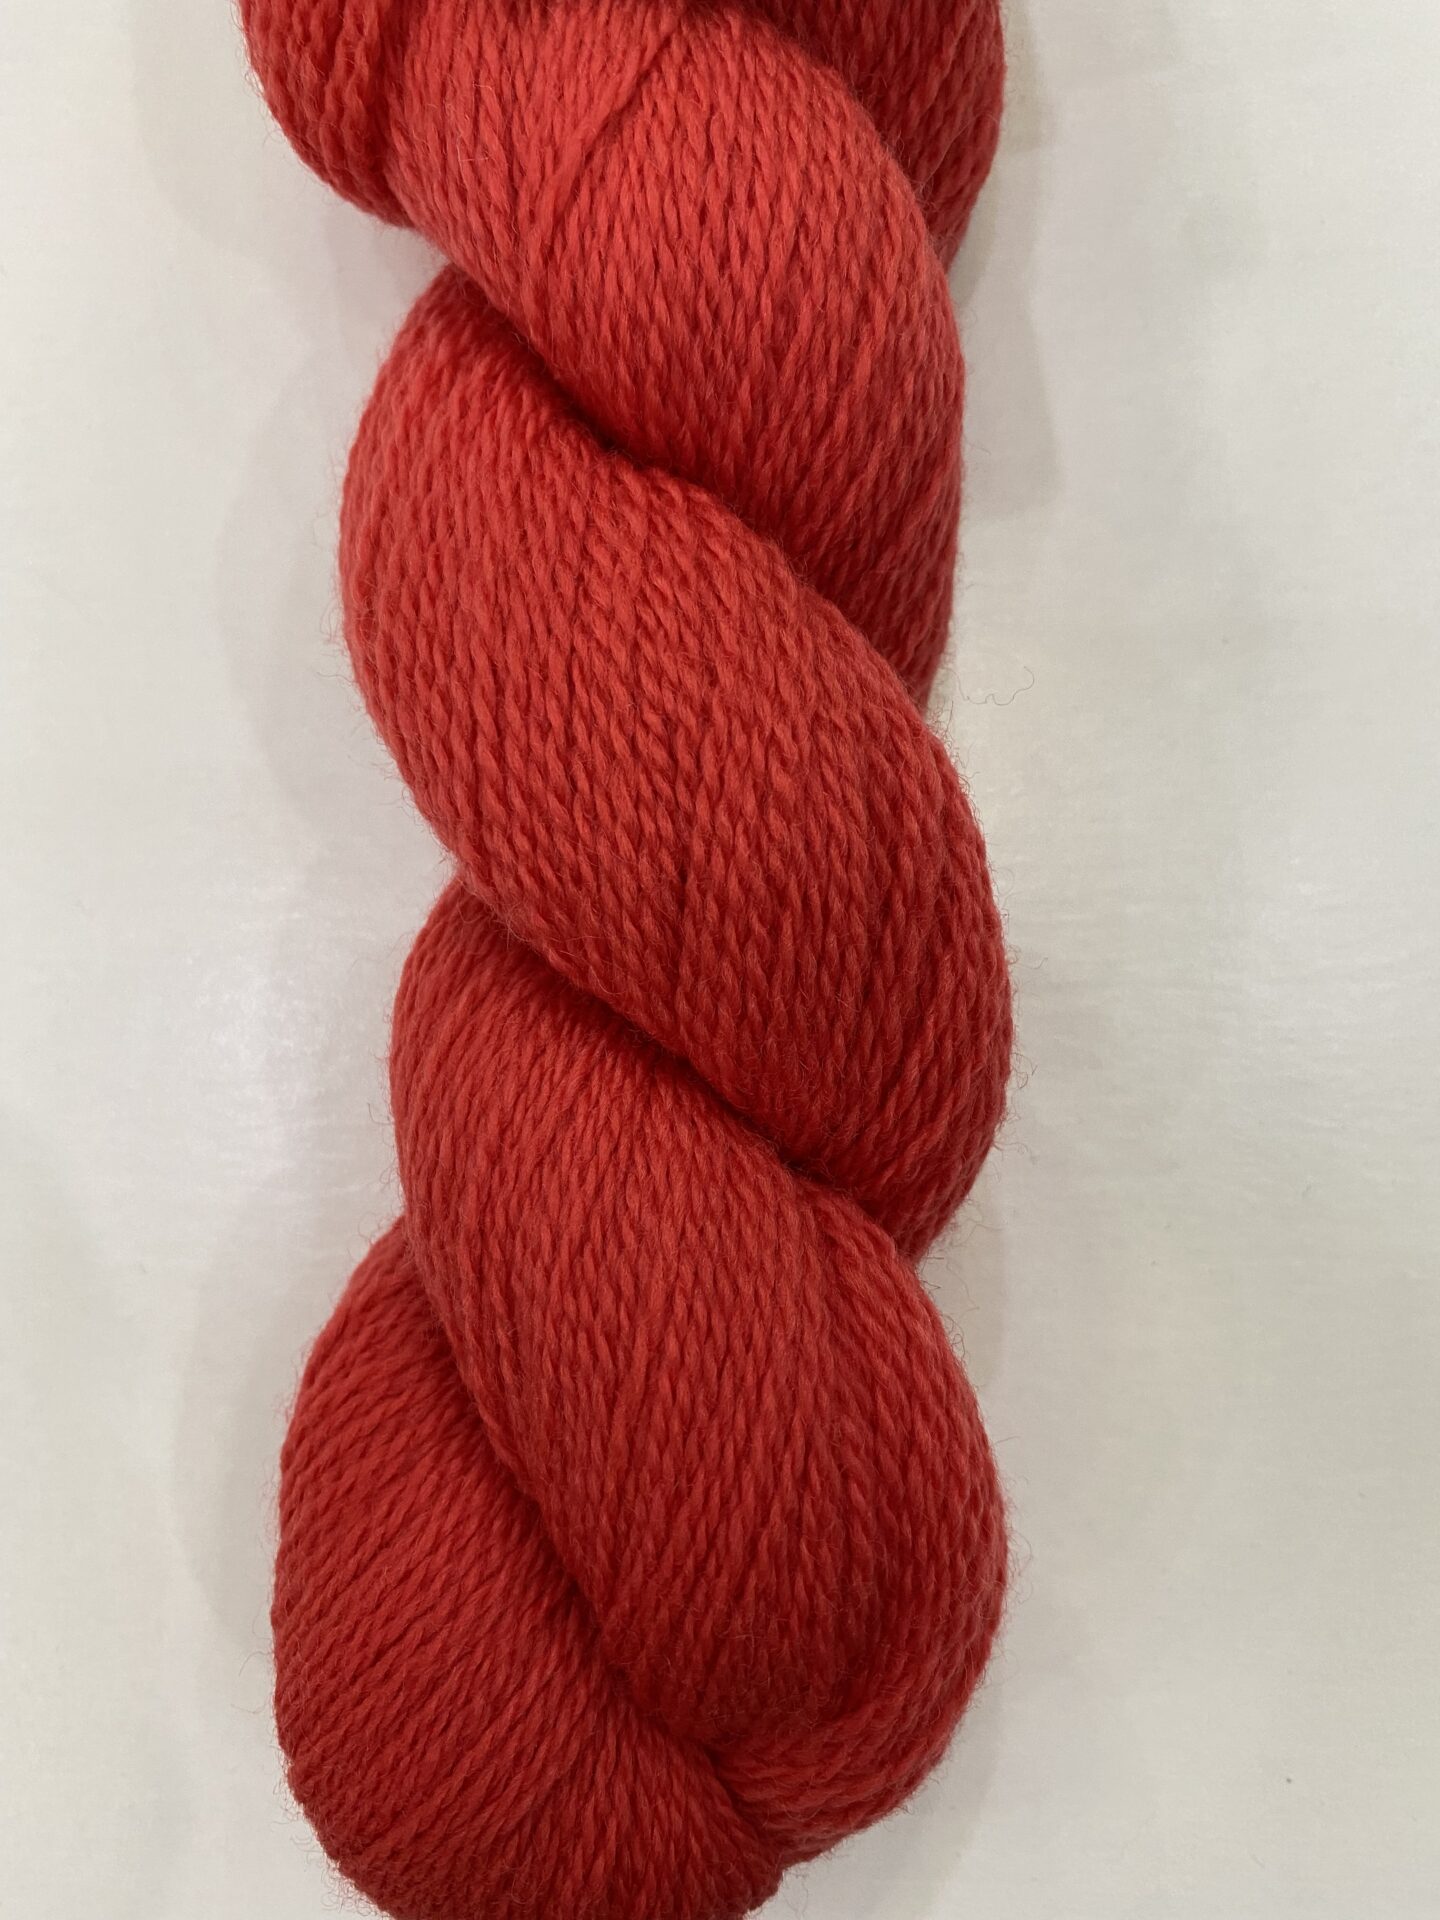 A big bunch of wool in dark red color